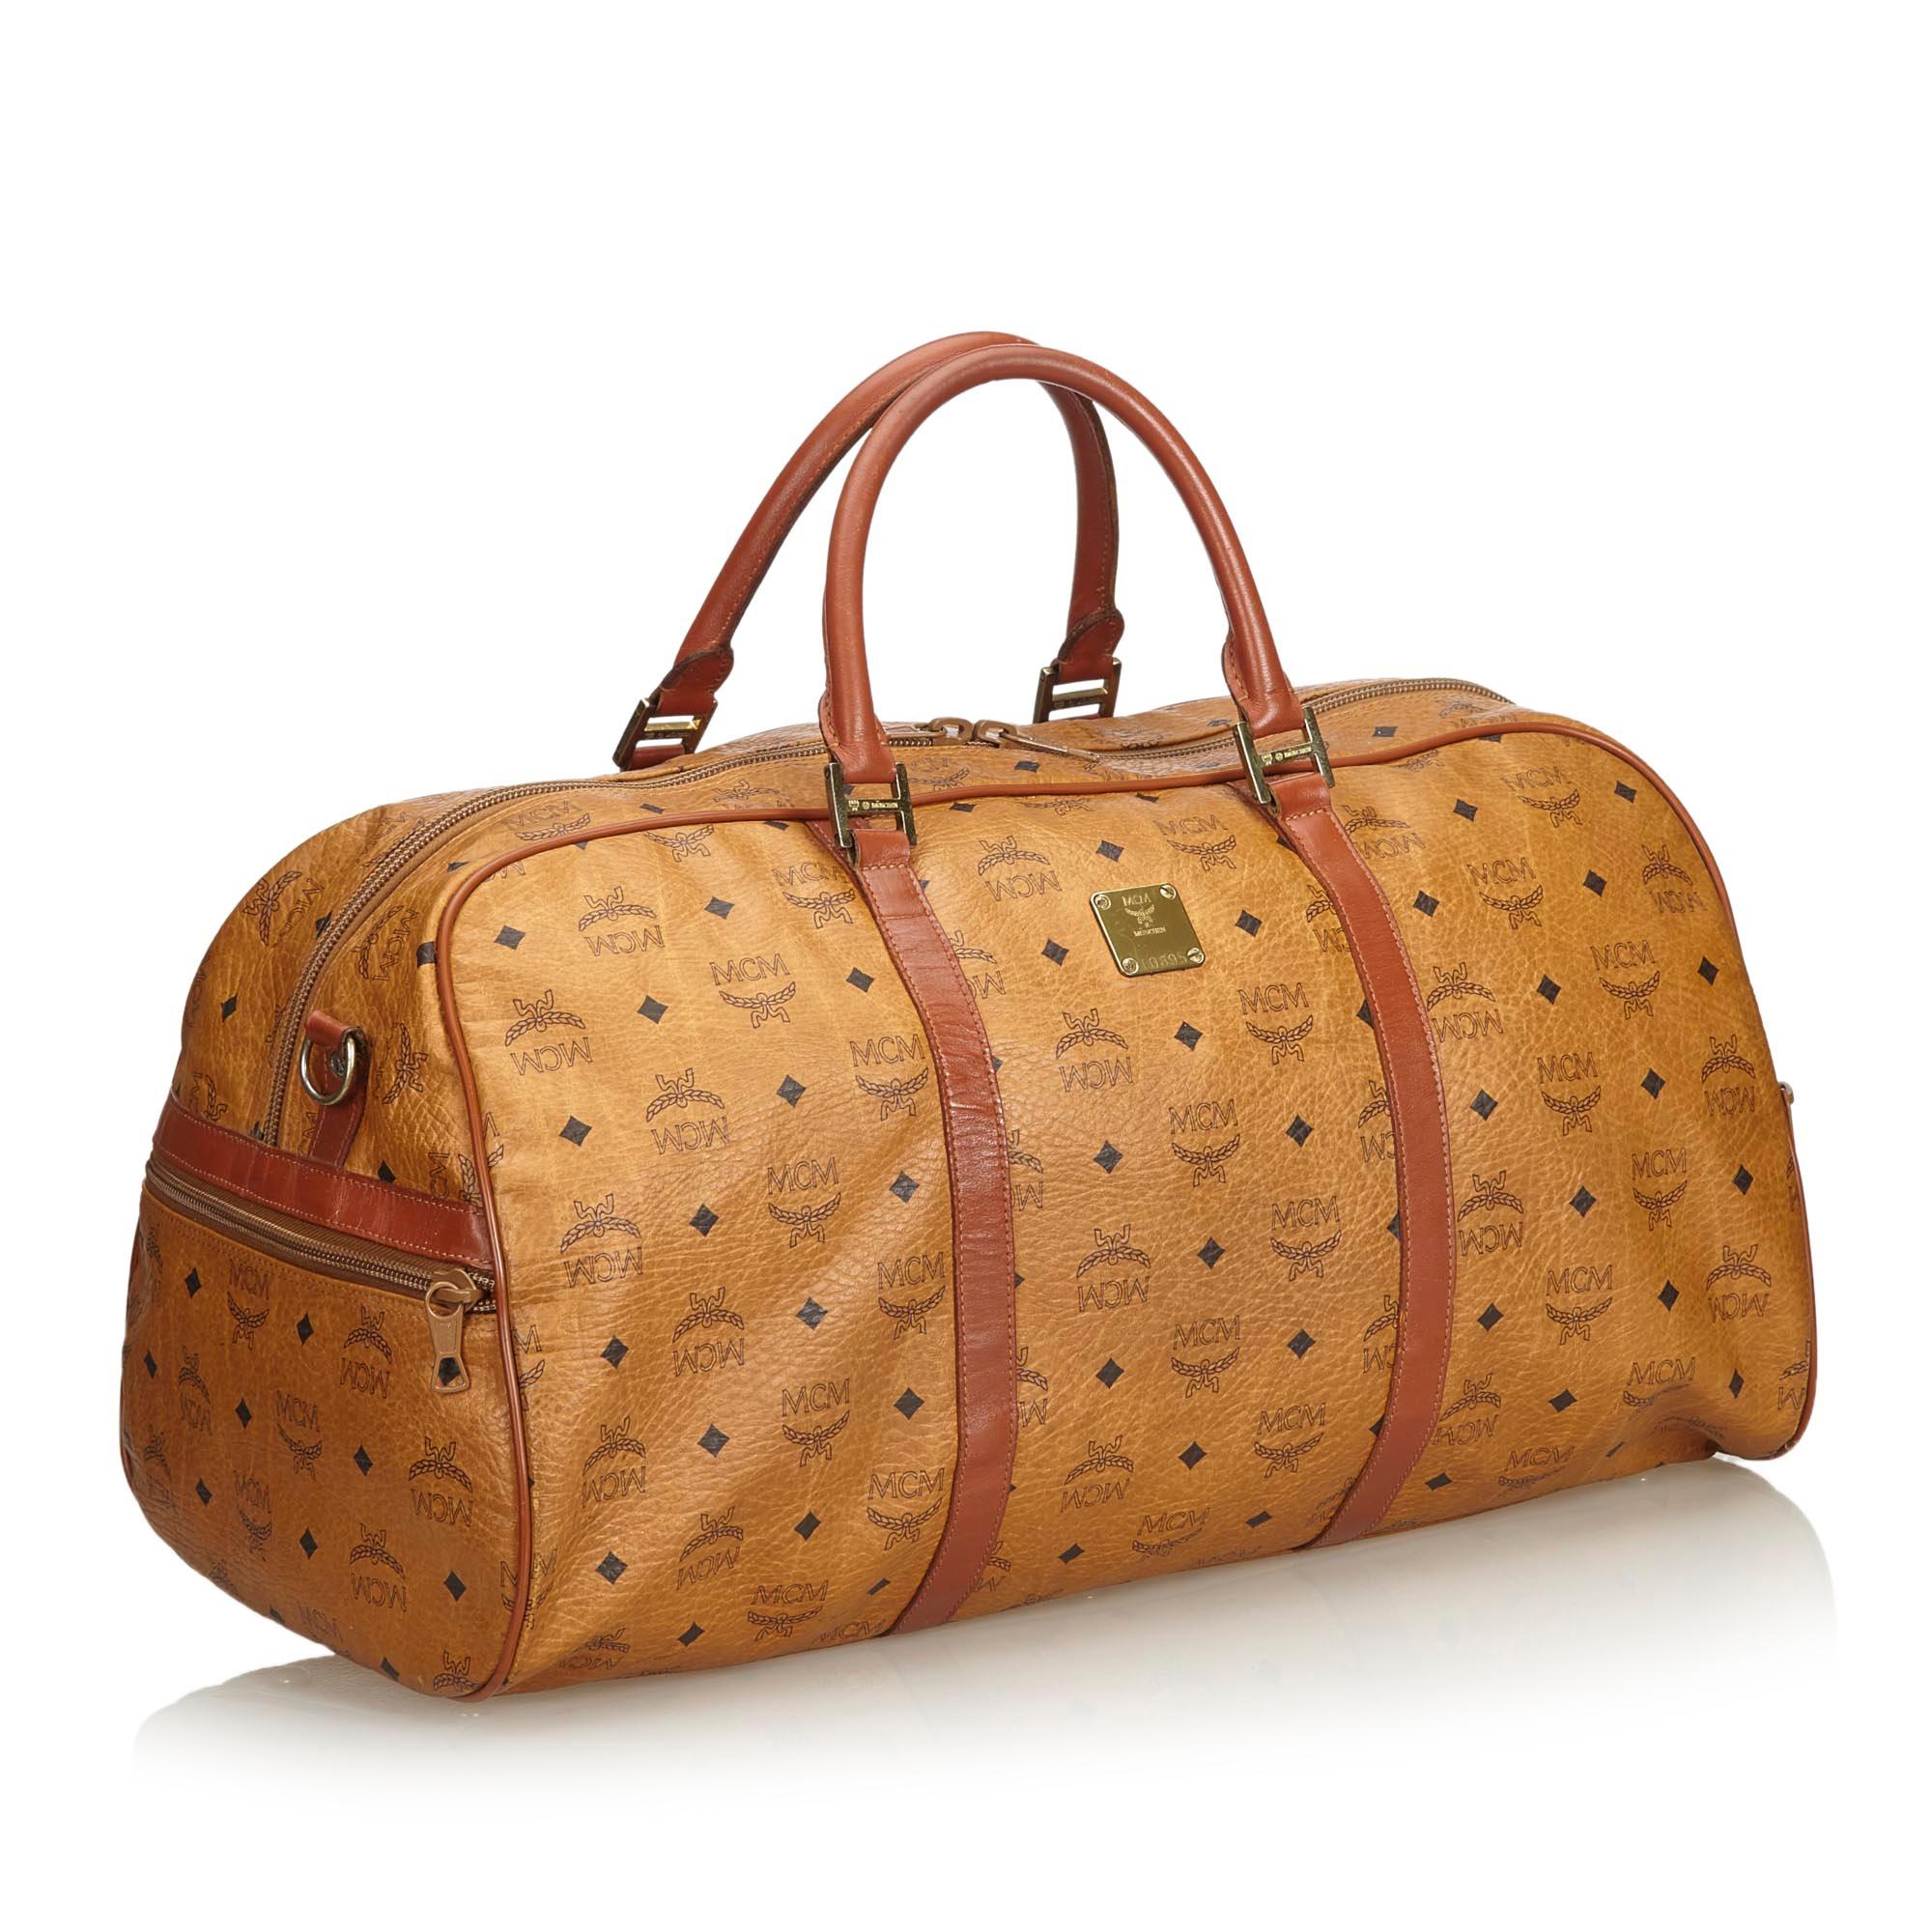 This duffle bag features a leather body, rolled leather handles, a detachable flat strap, a top zip closure, and an interior zip pocket. It carries as B condition rating.

Inclusions: 
This item does not come with inclusions.

Dimensions:
Length: